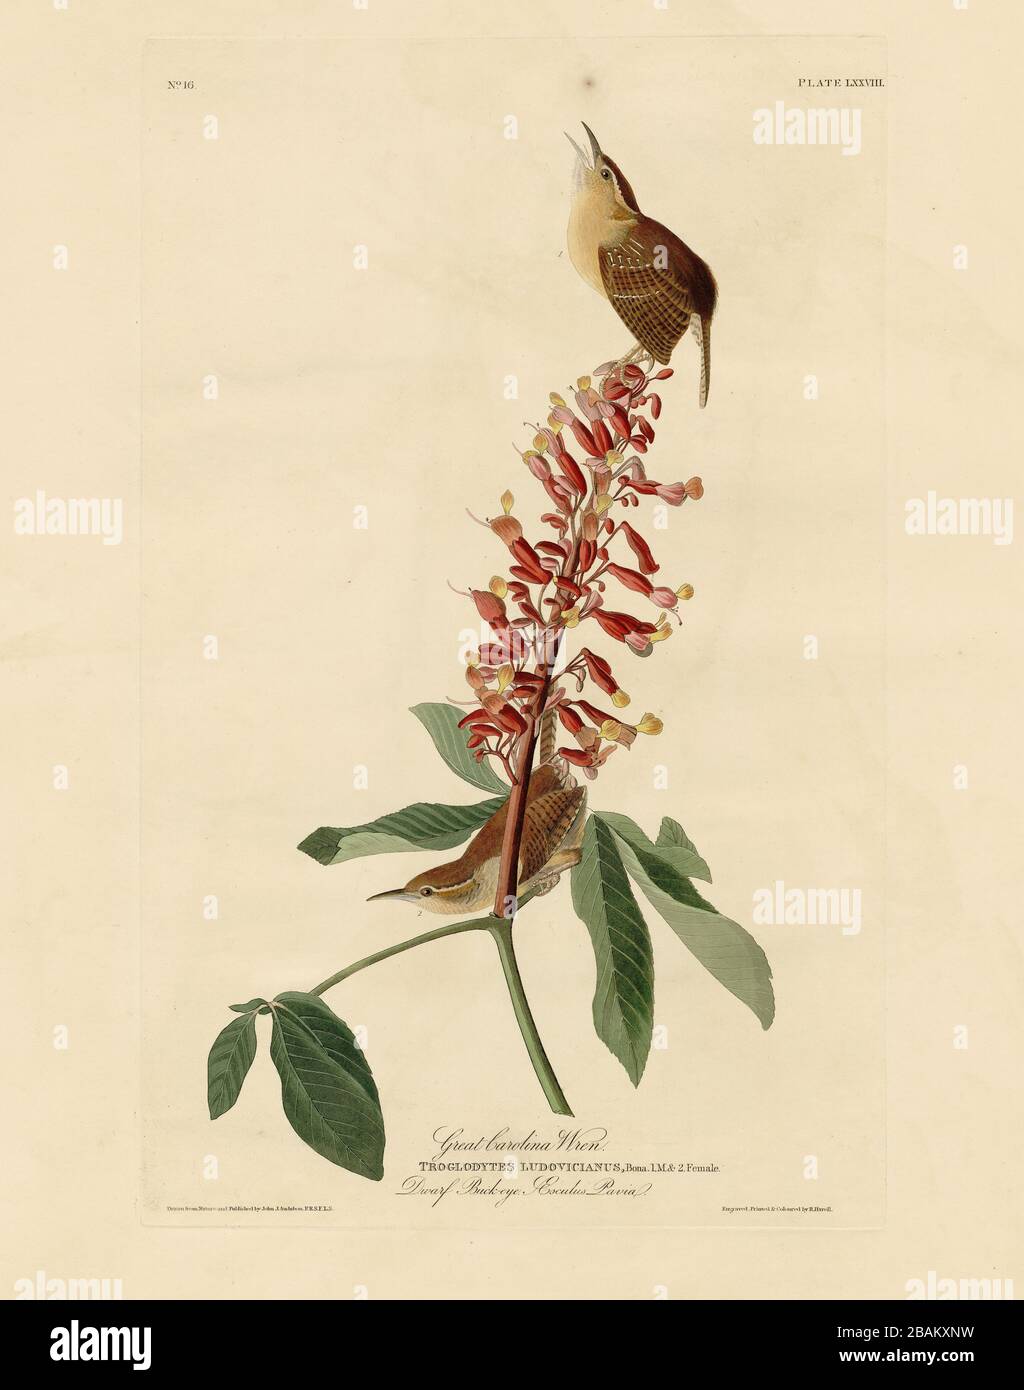 Plate 78 Great Carolina Wren from The Birds of America folio (1827–1839) by John James Audubon - Very high resolution and quality edited image Stock Photo